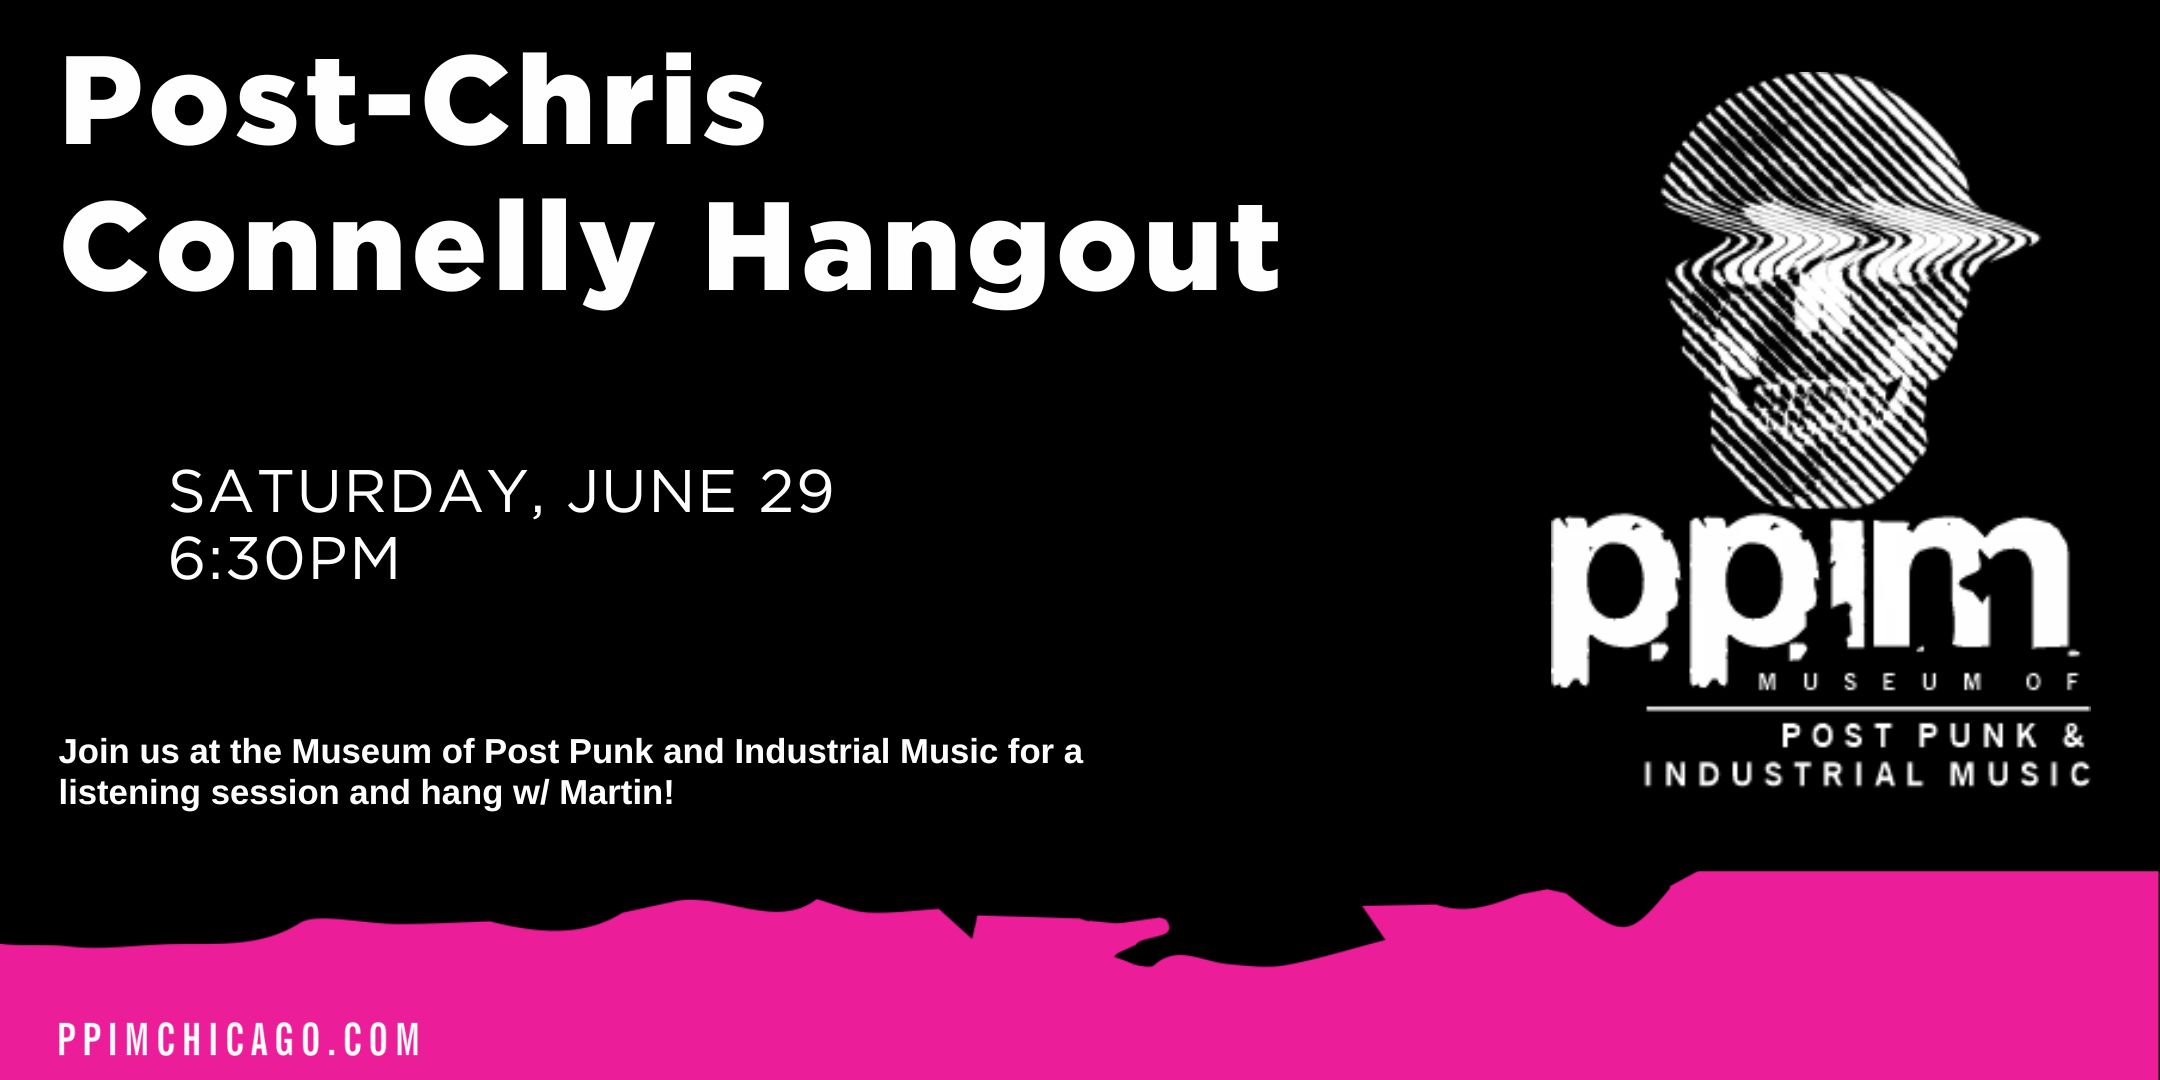 Post-Chris Connelly Hang, July Events, + More!